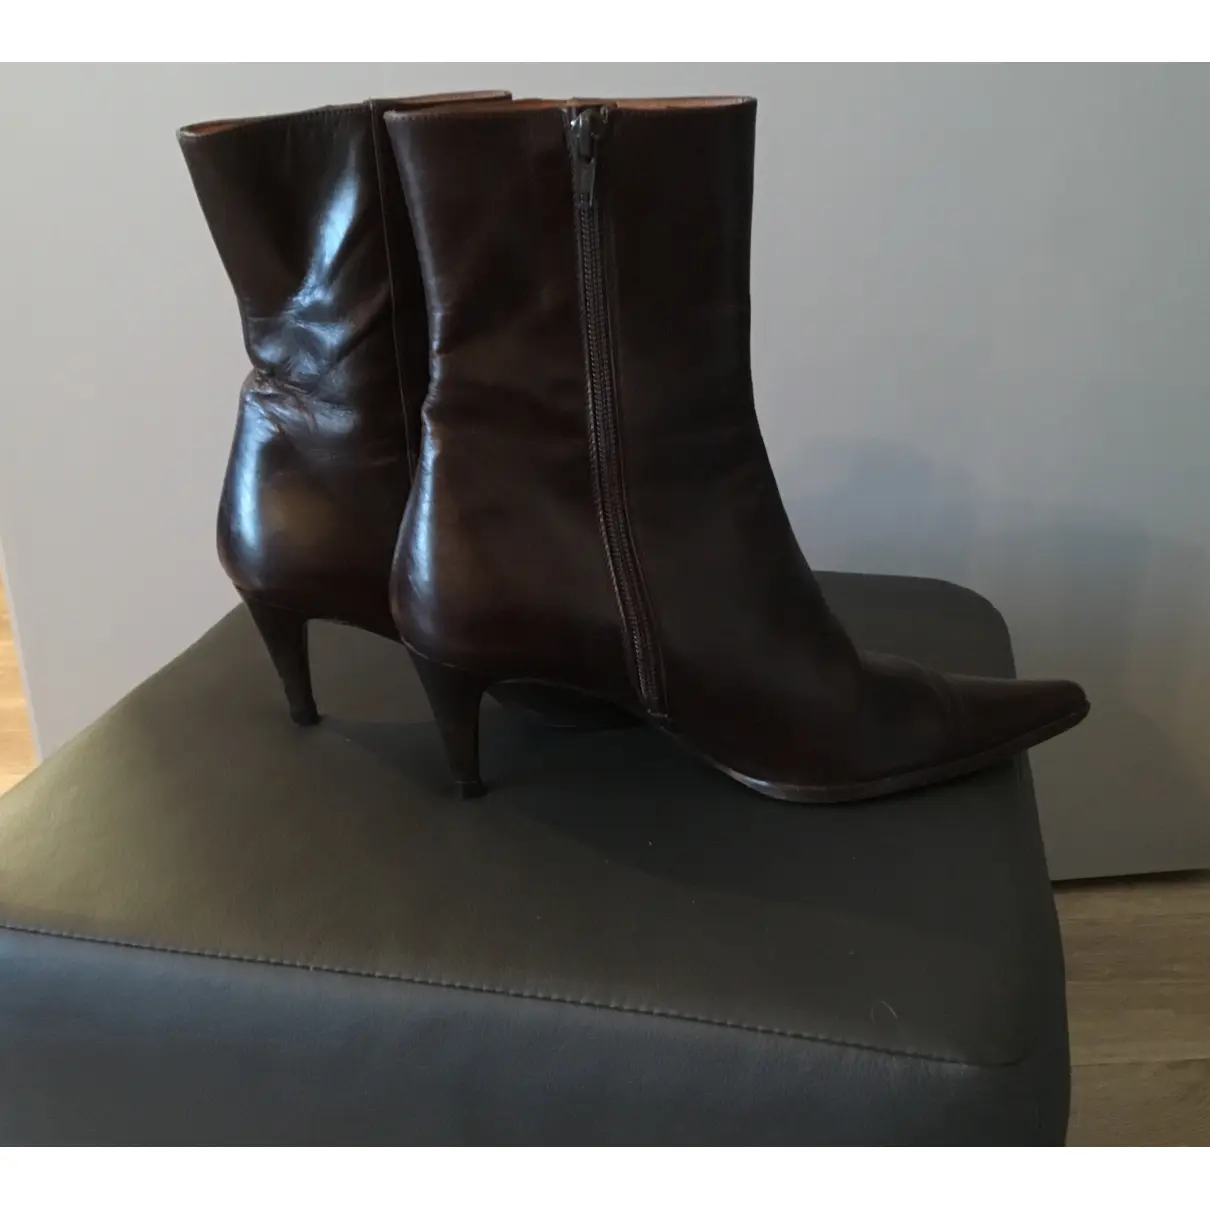 Jaime Mascaro Leather ankle boots for sale